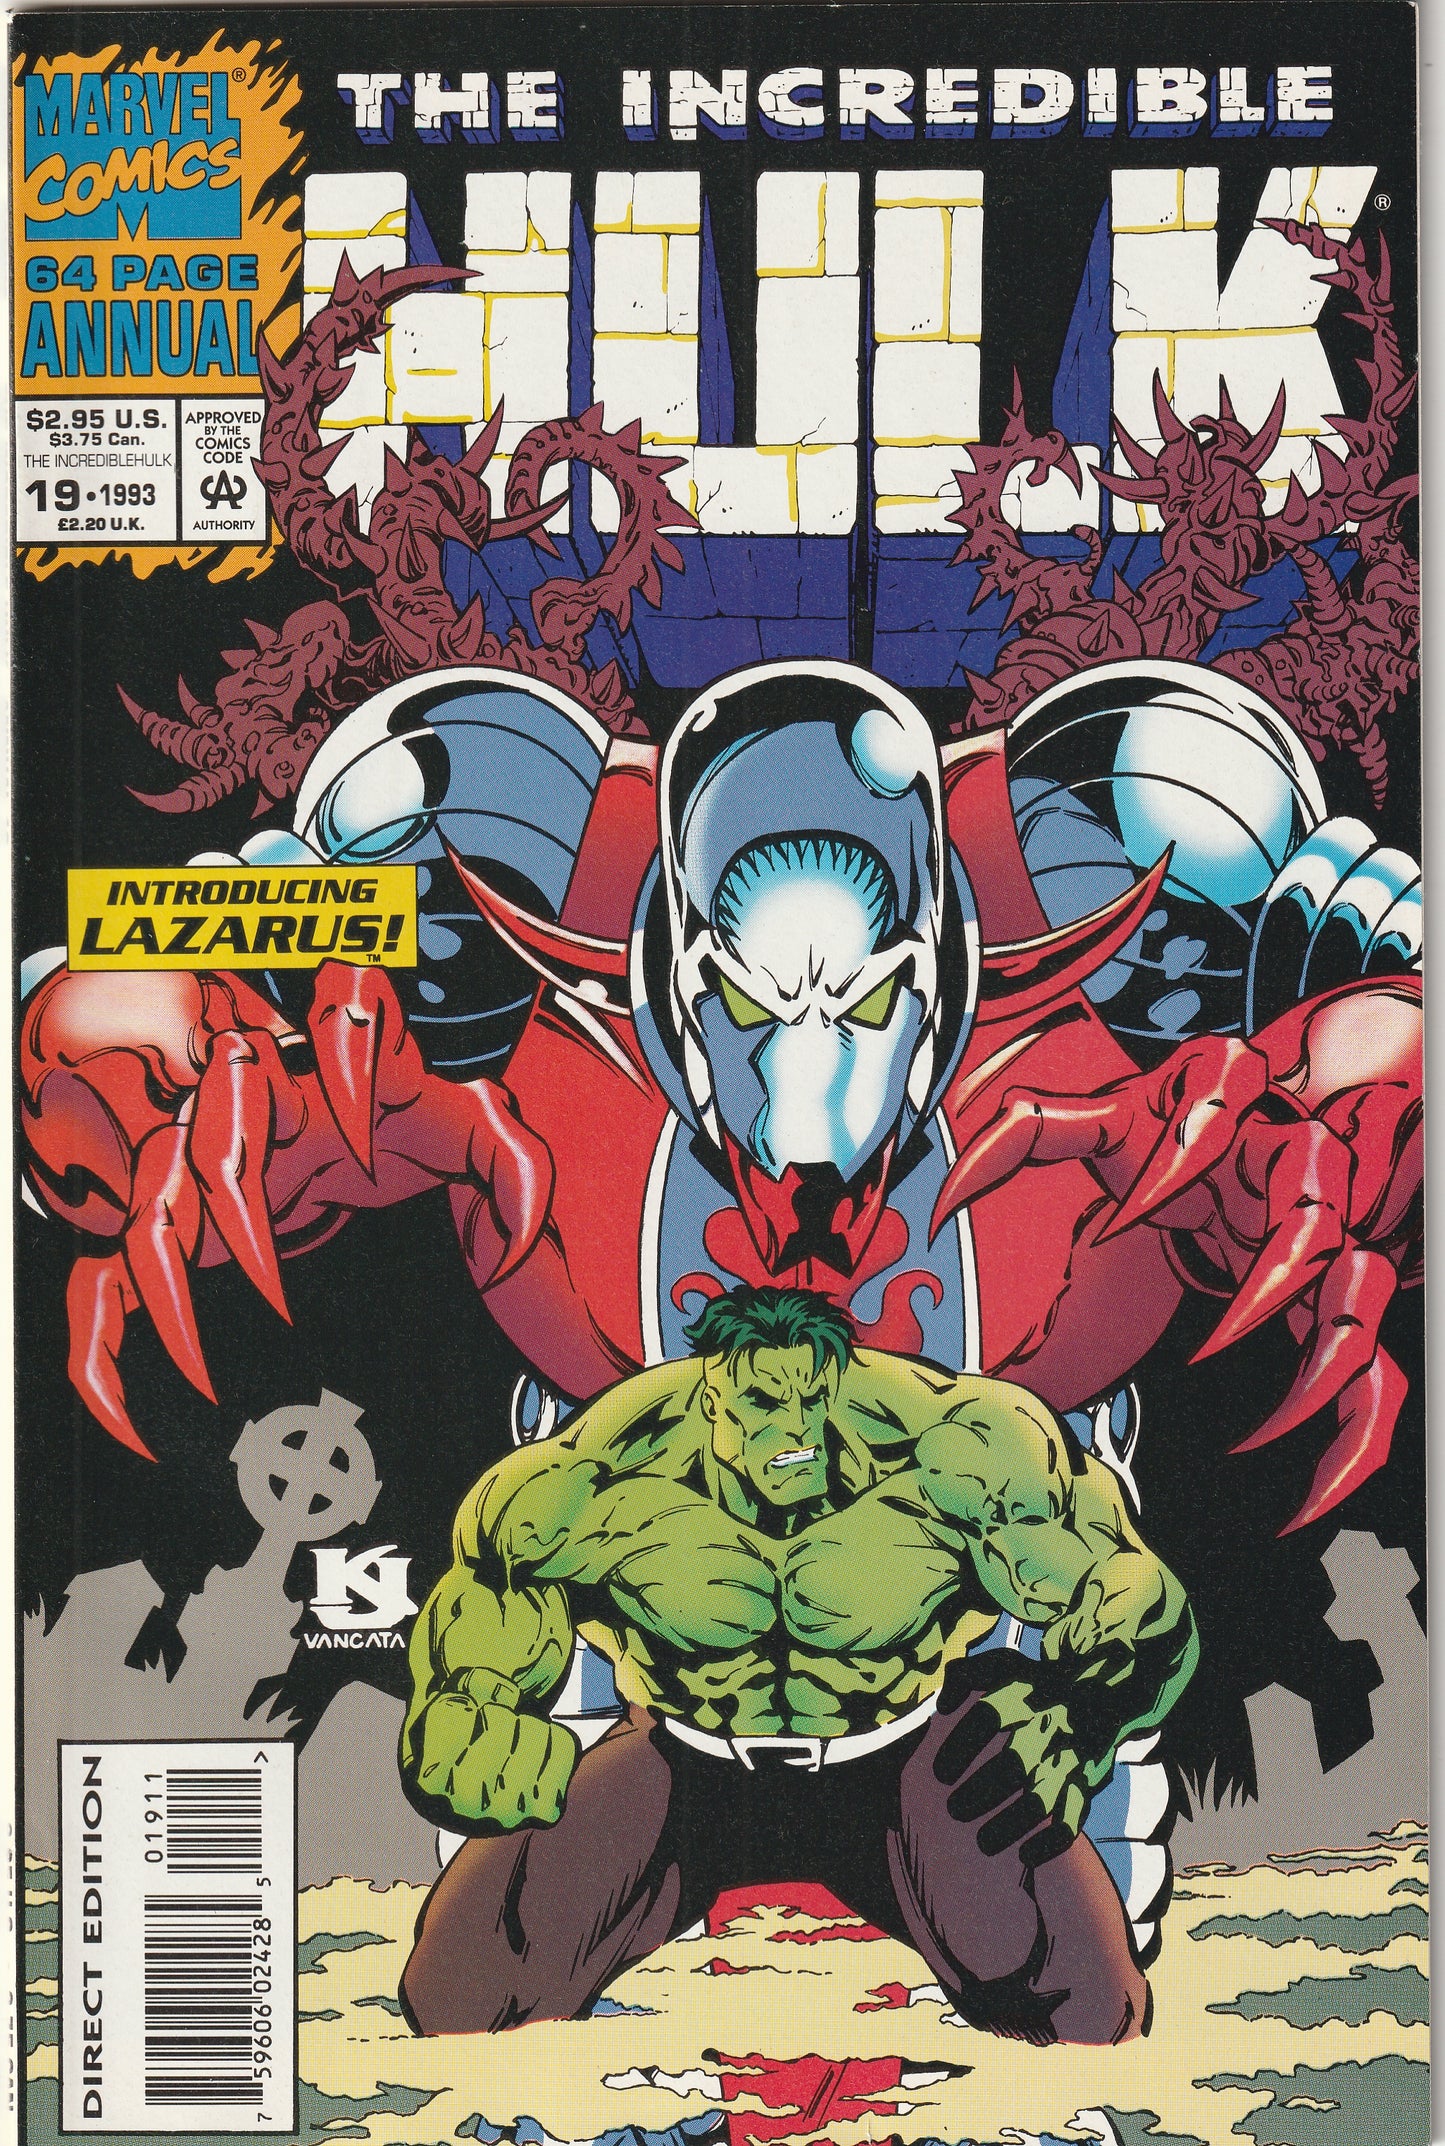 Incredible Hulk Annual #19 (1993) - 1st Appearance of Lazarus